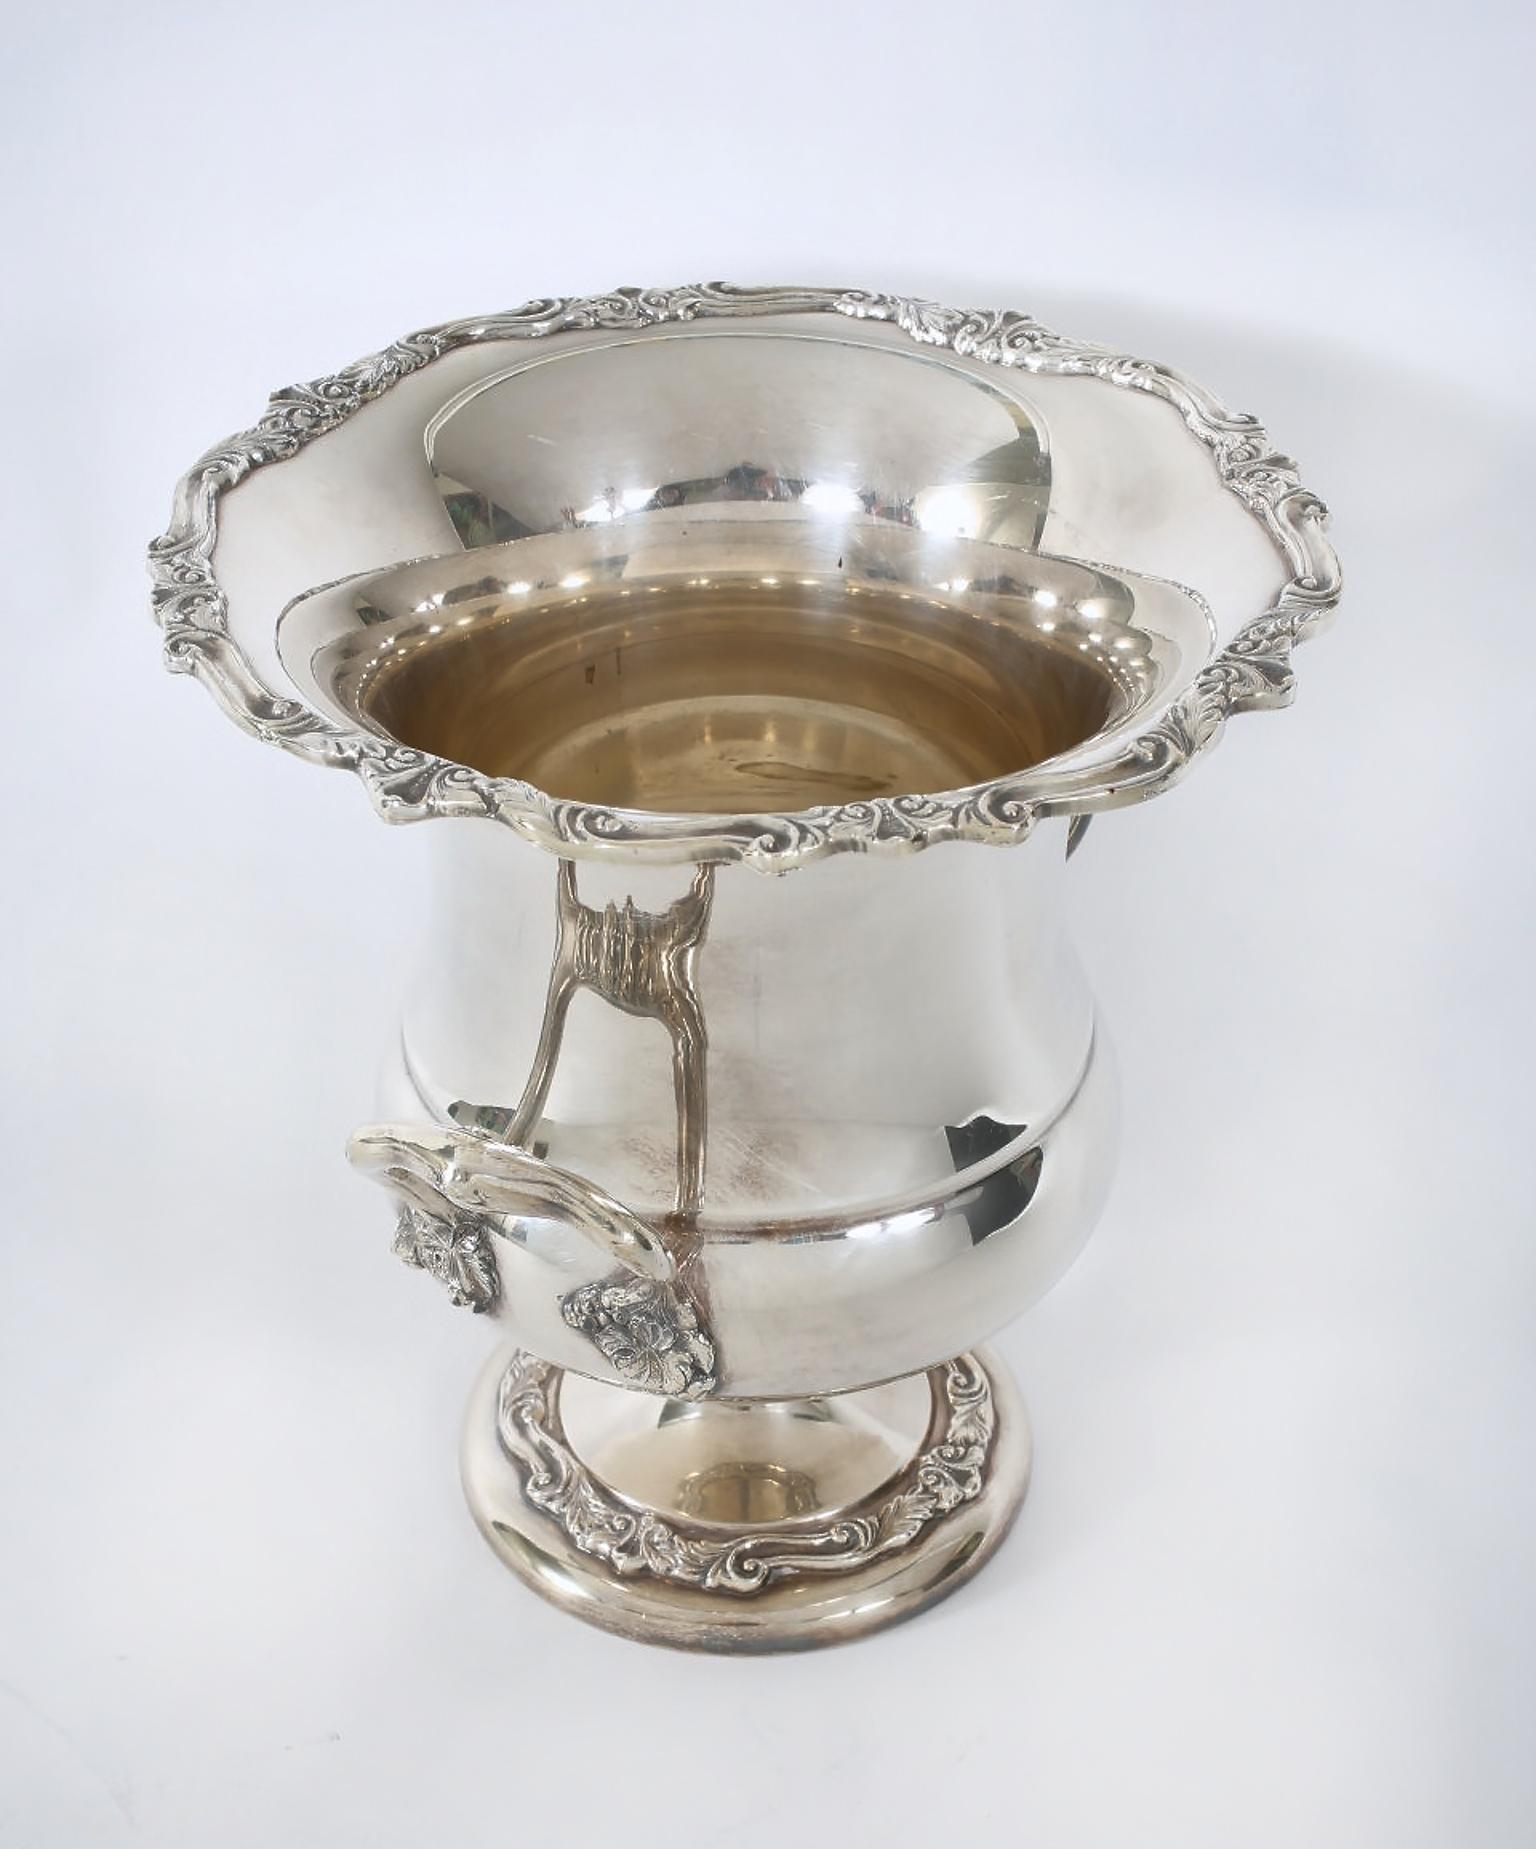 English silver plated wine cooler / ice bucket with side handles and exterior design details. The bucket is in great vintage condition with wear consistent with age / use. Maker's mark undersigned. It stands about 10.5